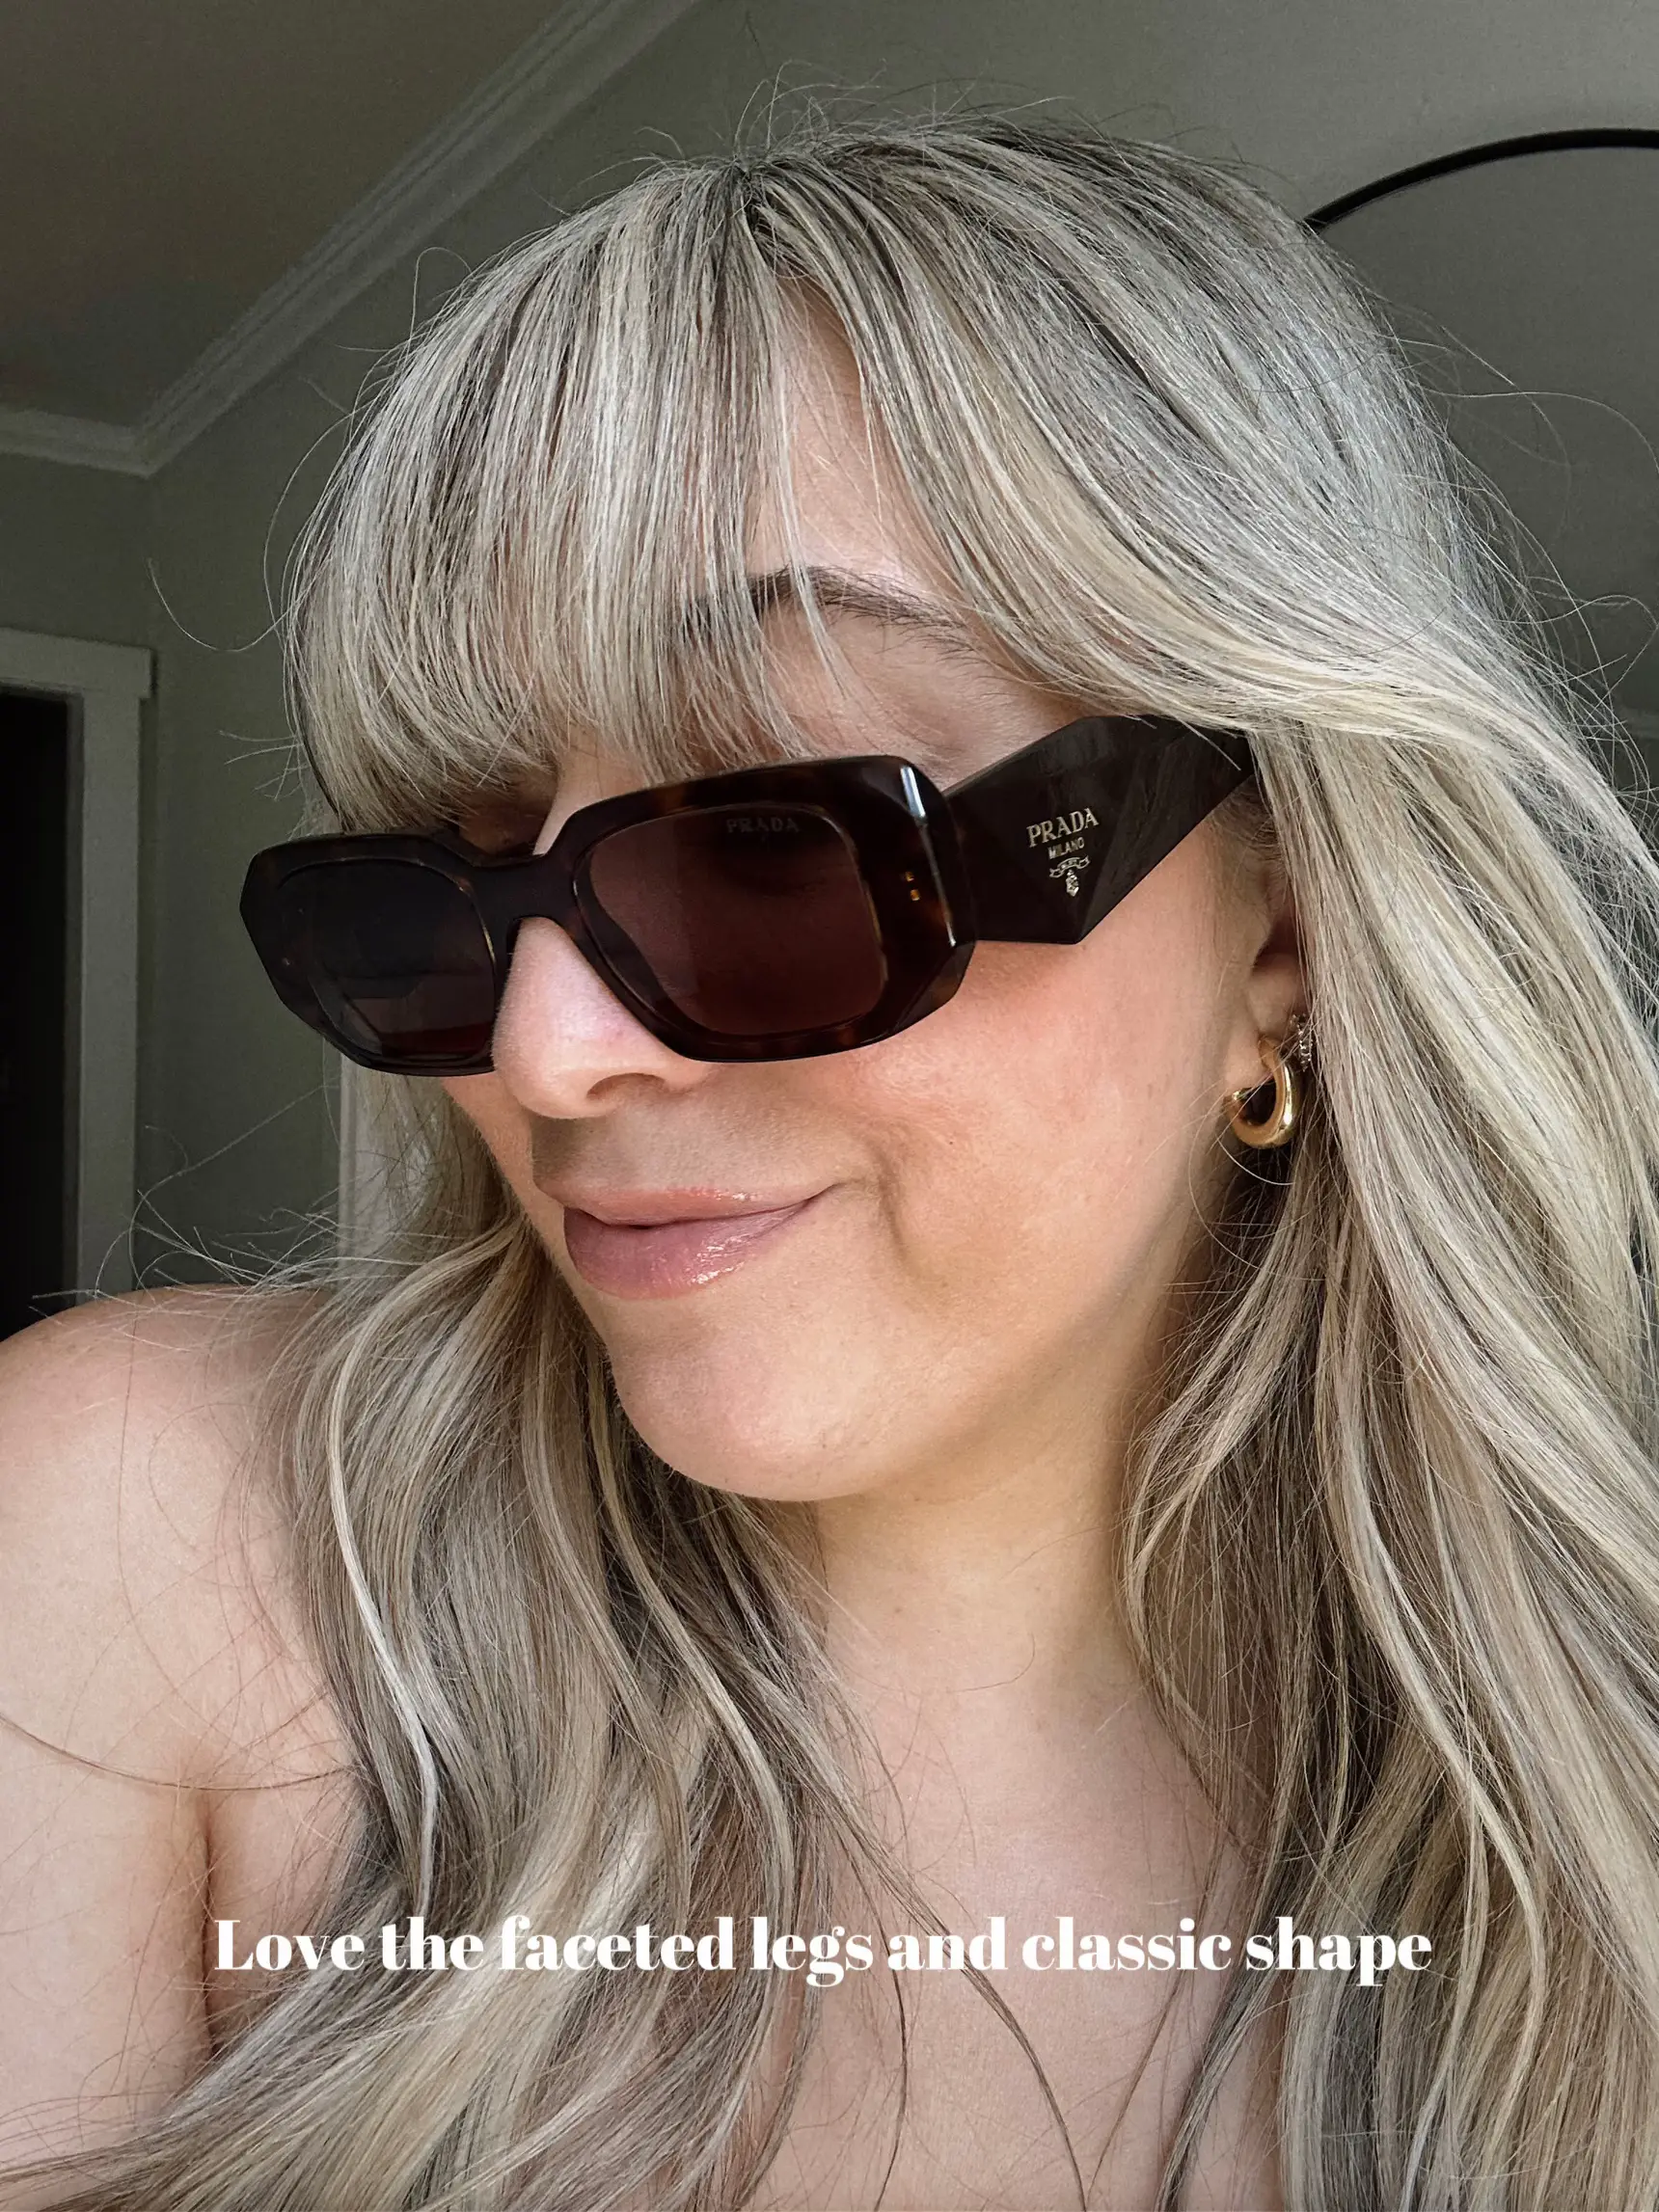 Saint Laurent Mica Sunglasses Review, Gallery posted by StephaniePernas